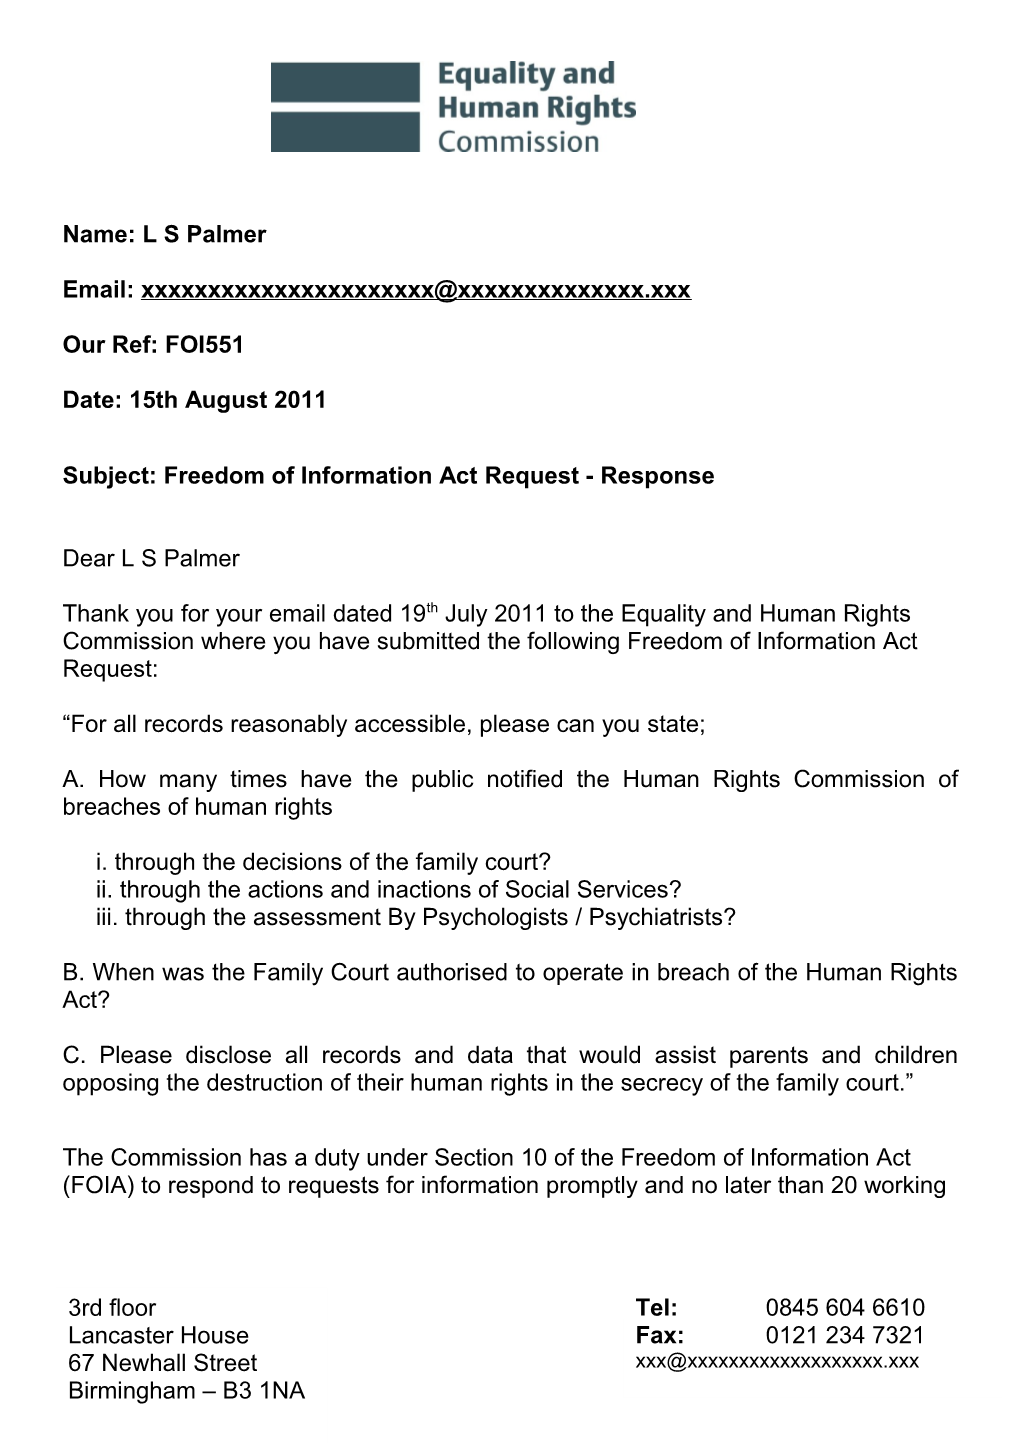 Subject: Freedom of Information Act Request - Response